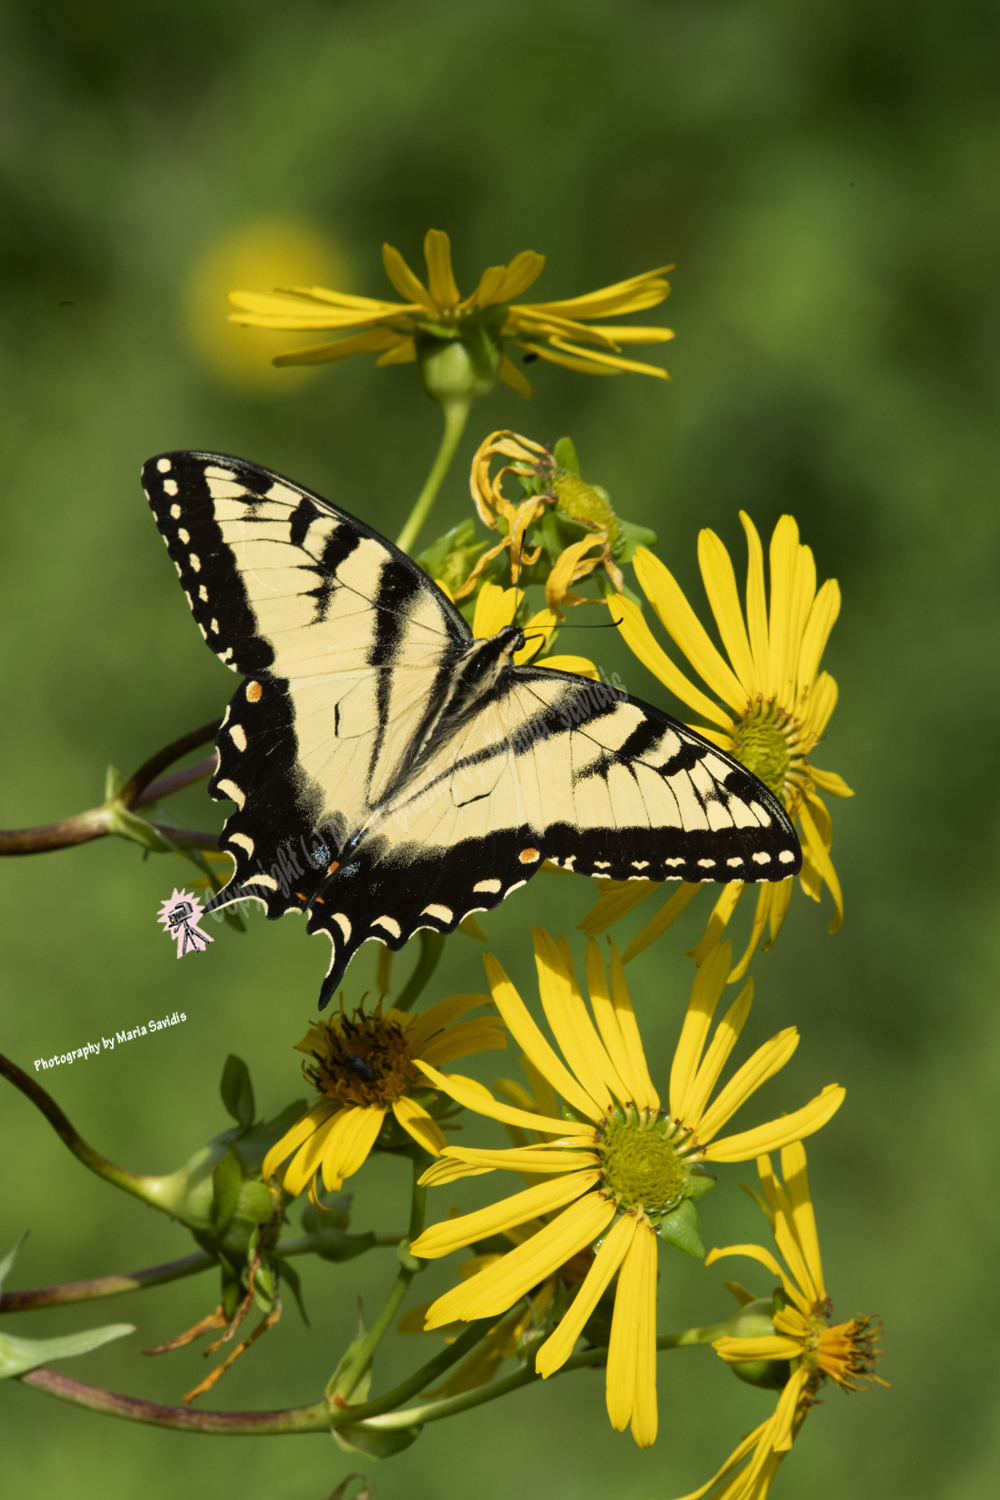 Tiger Swallowtail Butterfly, South Mountain Reservation, Maplewood, NJ 2020-D85-6613